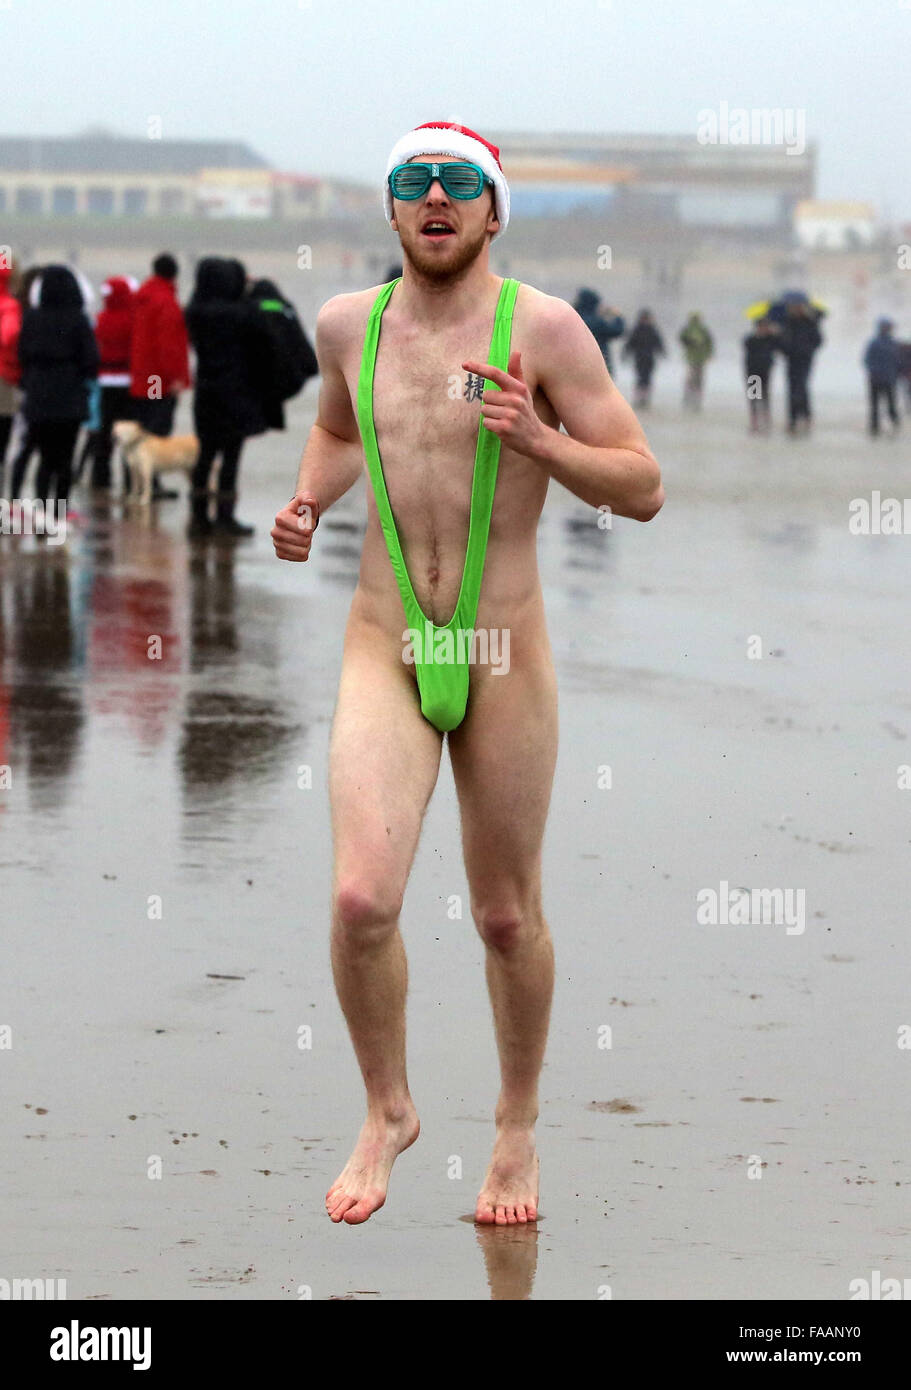 Porthcawl, UK. Friday 25 December 2015 A young man in a mankini runs towards the seaRe: Hundreds of people in fancy dress, have taken part in this year's Christmas Swim in Porthcawl, south Wales. Credit:  D Legakis/Alamy Live News Stock Photo